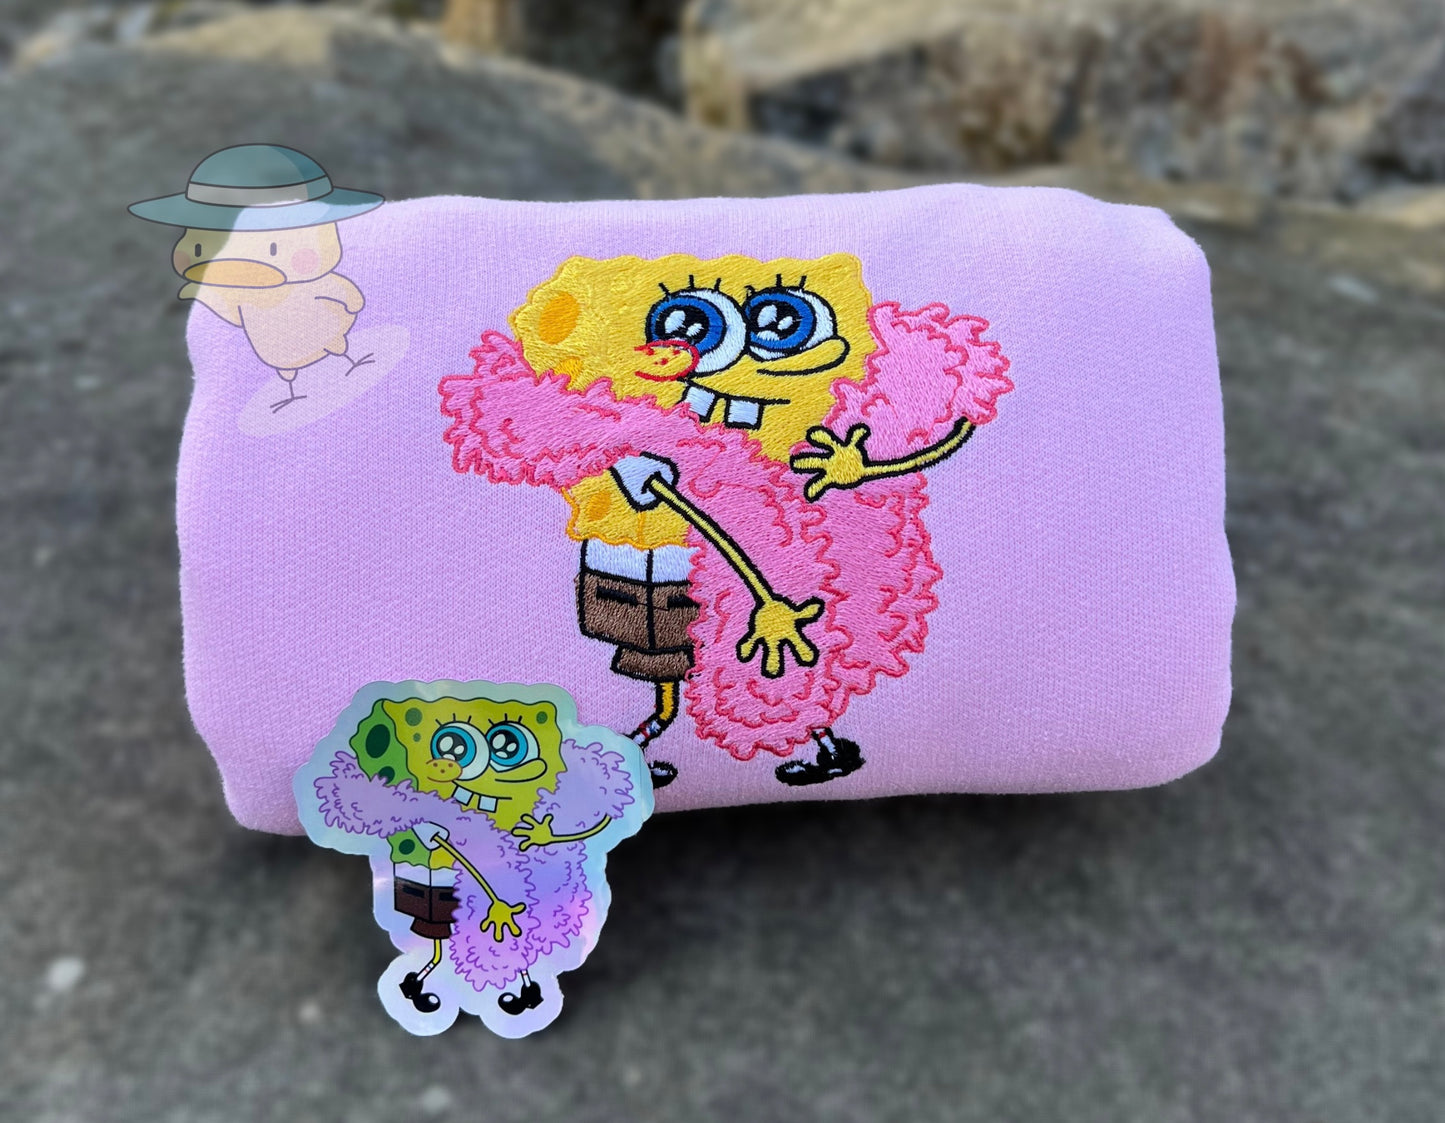 Spongy Scarf Embroidery Crewneck Sweatshirt and Holographic Sticker Set